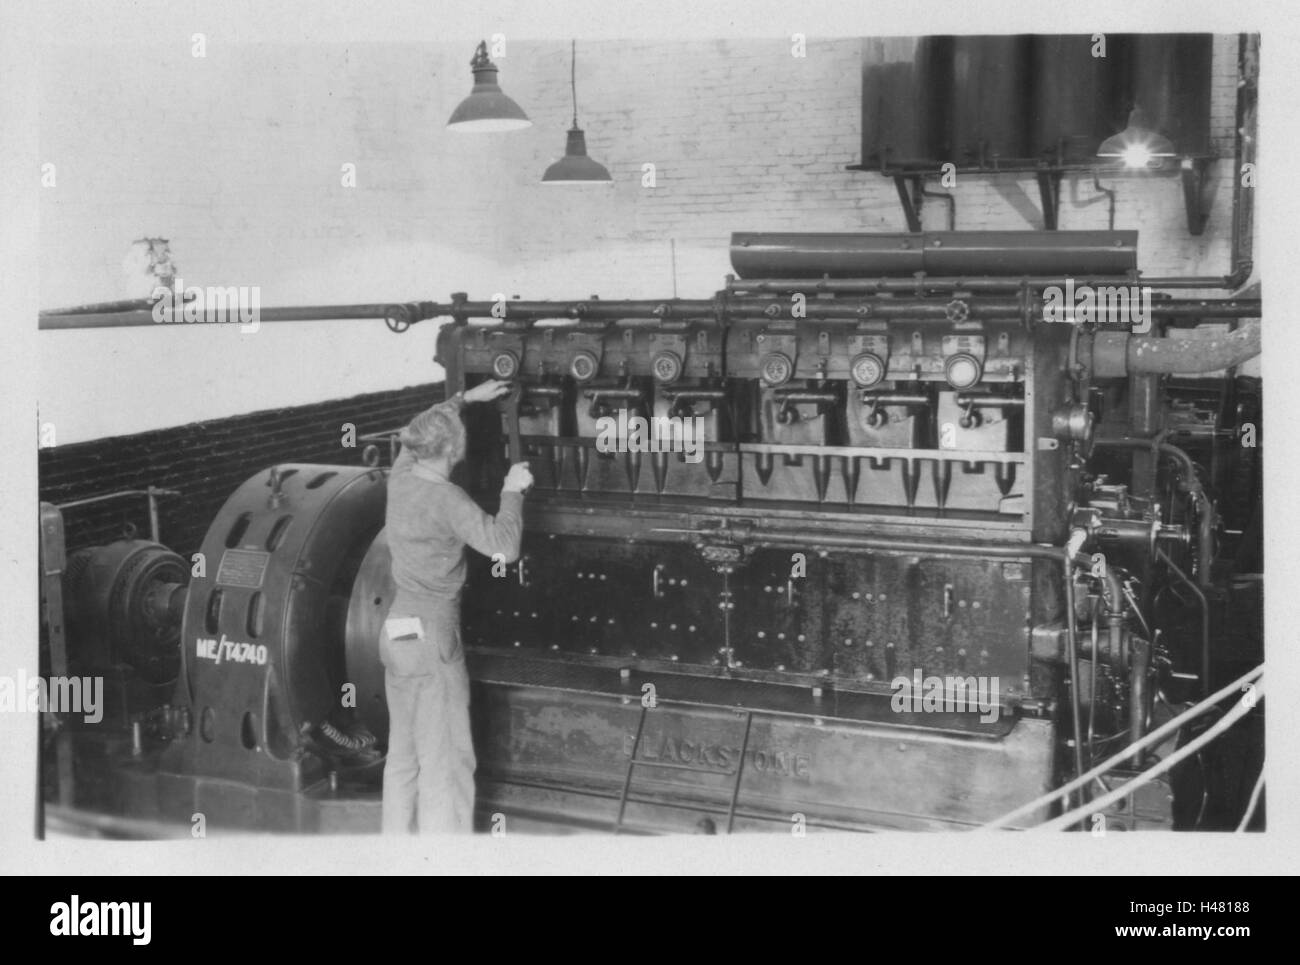 Unidentified army engineer tending to a Blackstone diesel generator. Photo taken in 10 Base Ordnance Depot Royal Army Ordnance Corps (RAOC) camp at Geneifa Ismailia area near the Suez Canal 1952 Egypt Stock Photo